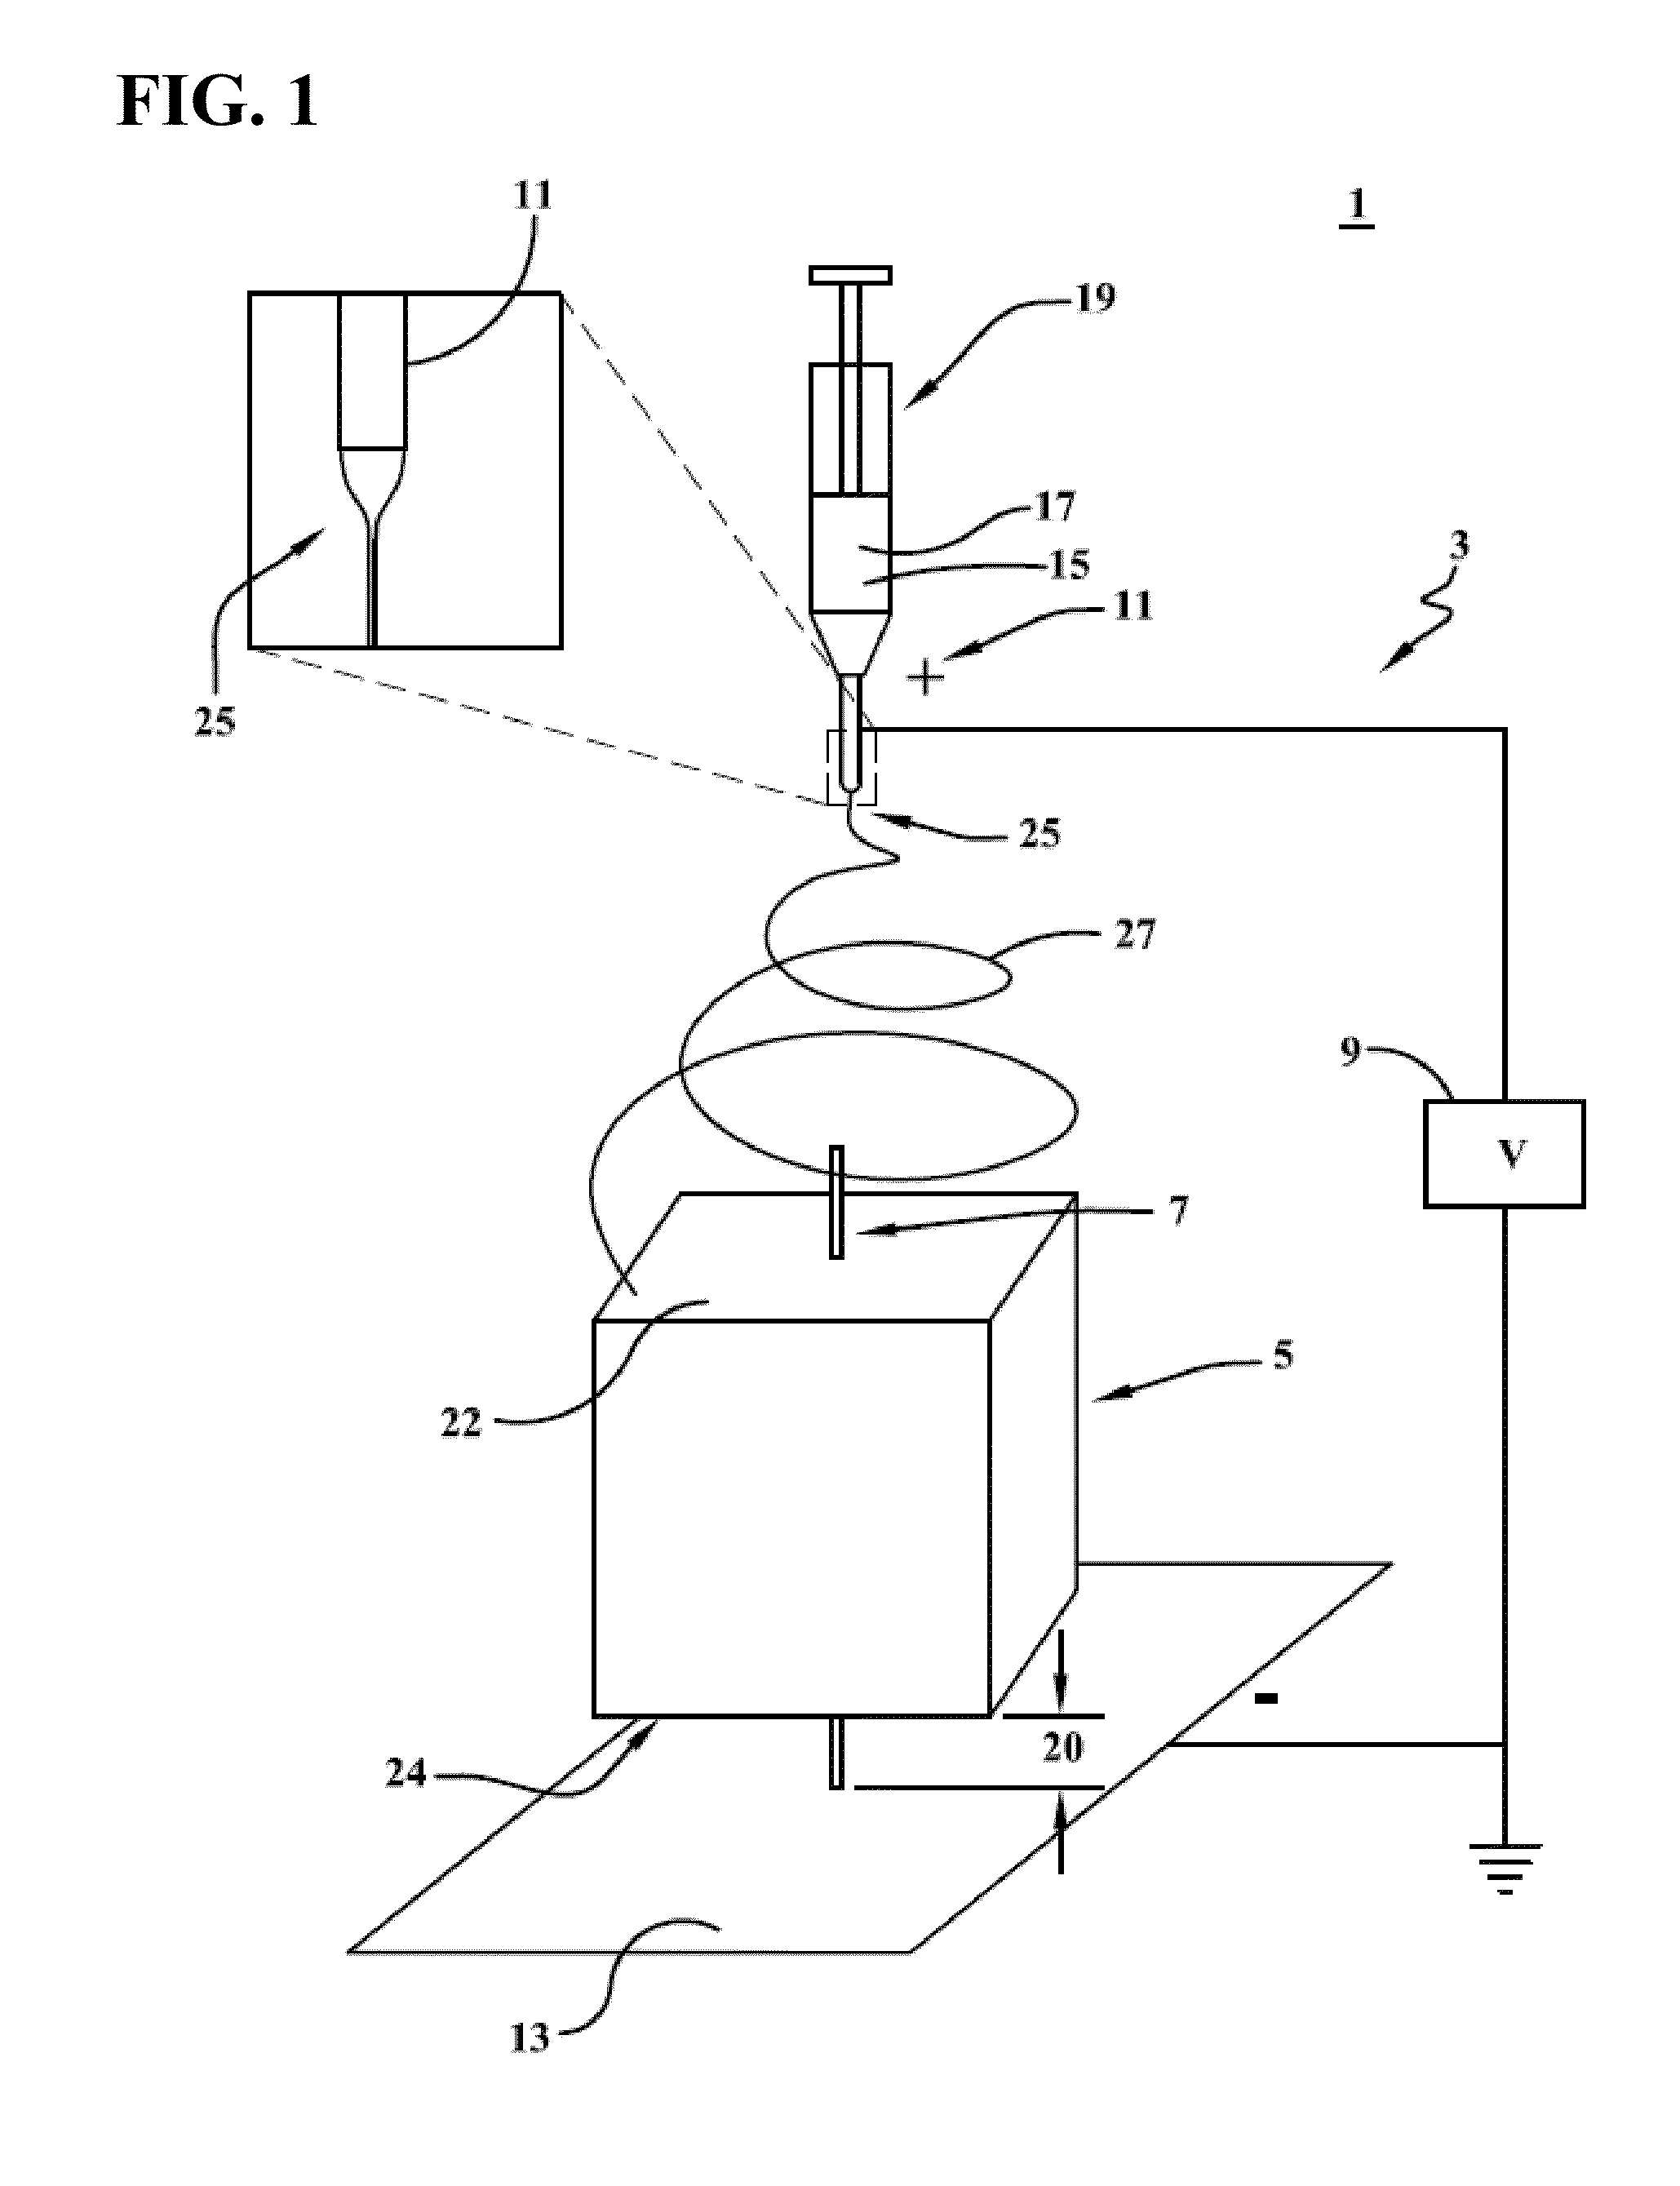 Apparatus and method for electrospinning a nanofiber coating on surfaces of poorly conductive three-dimensional objects